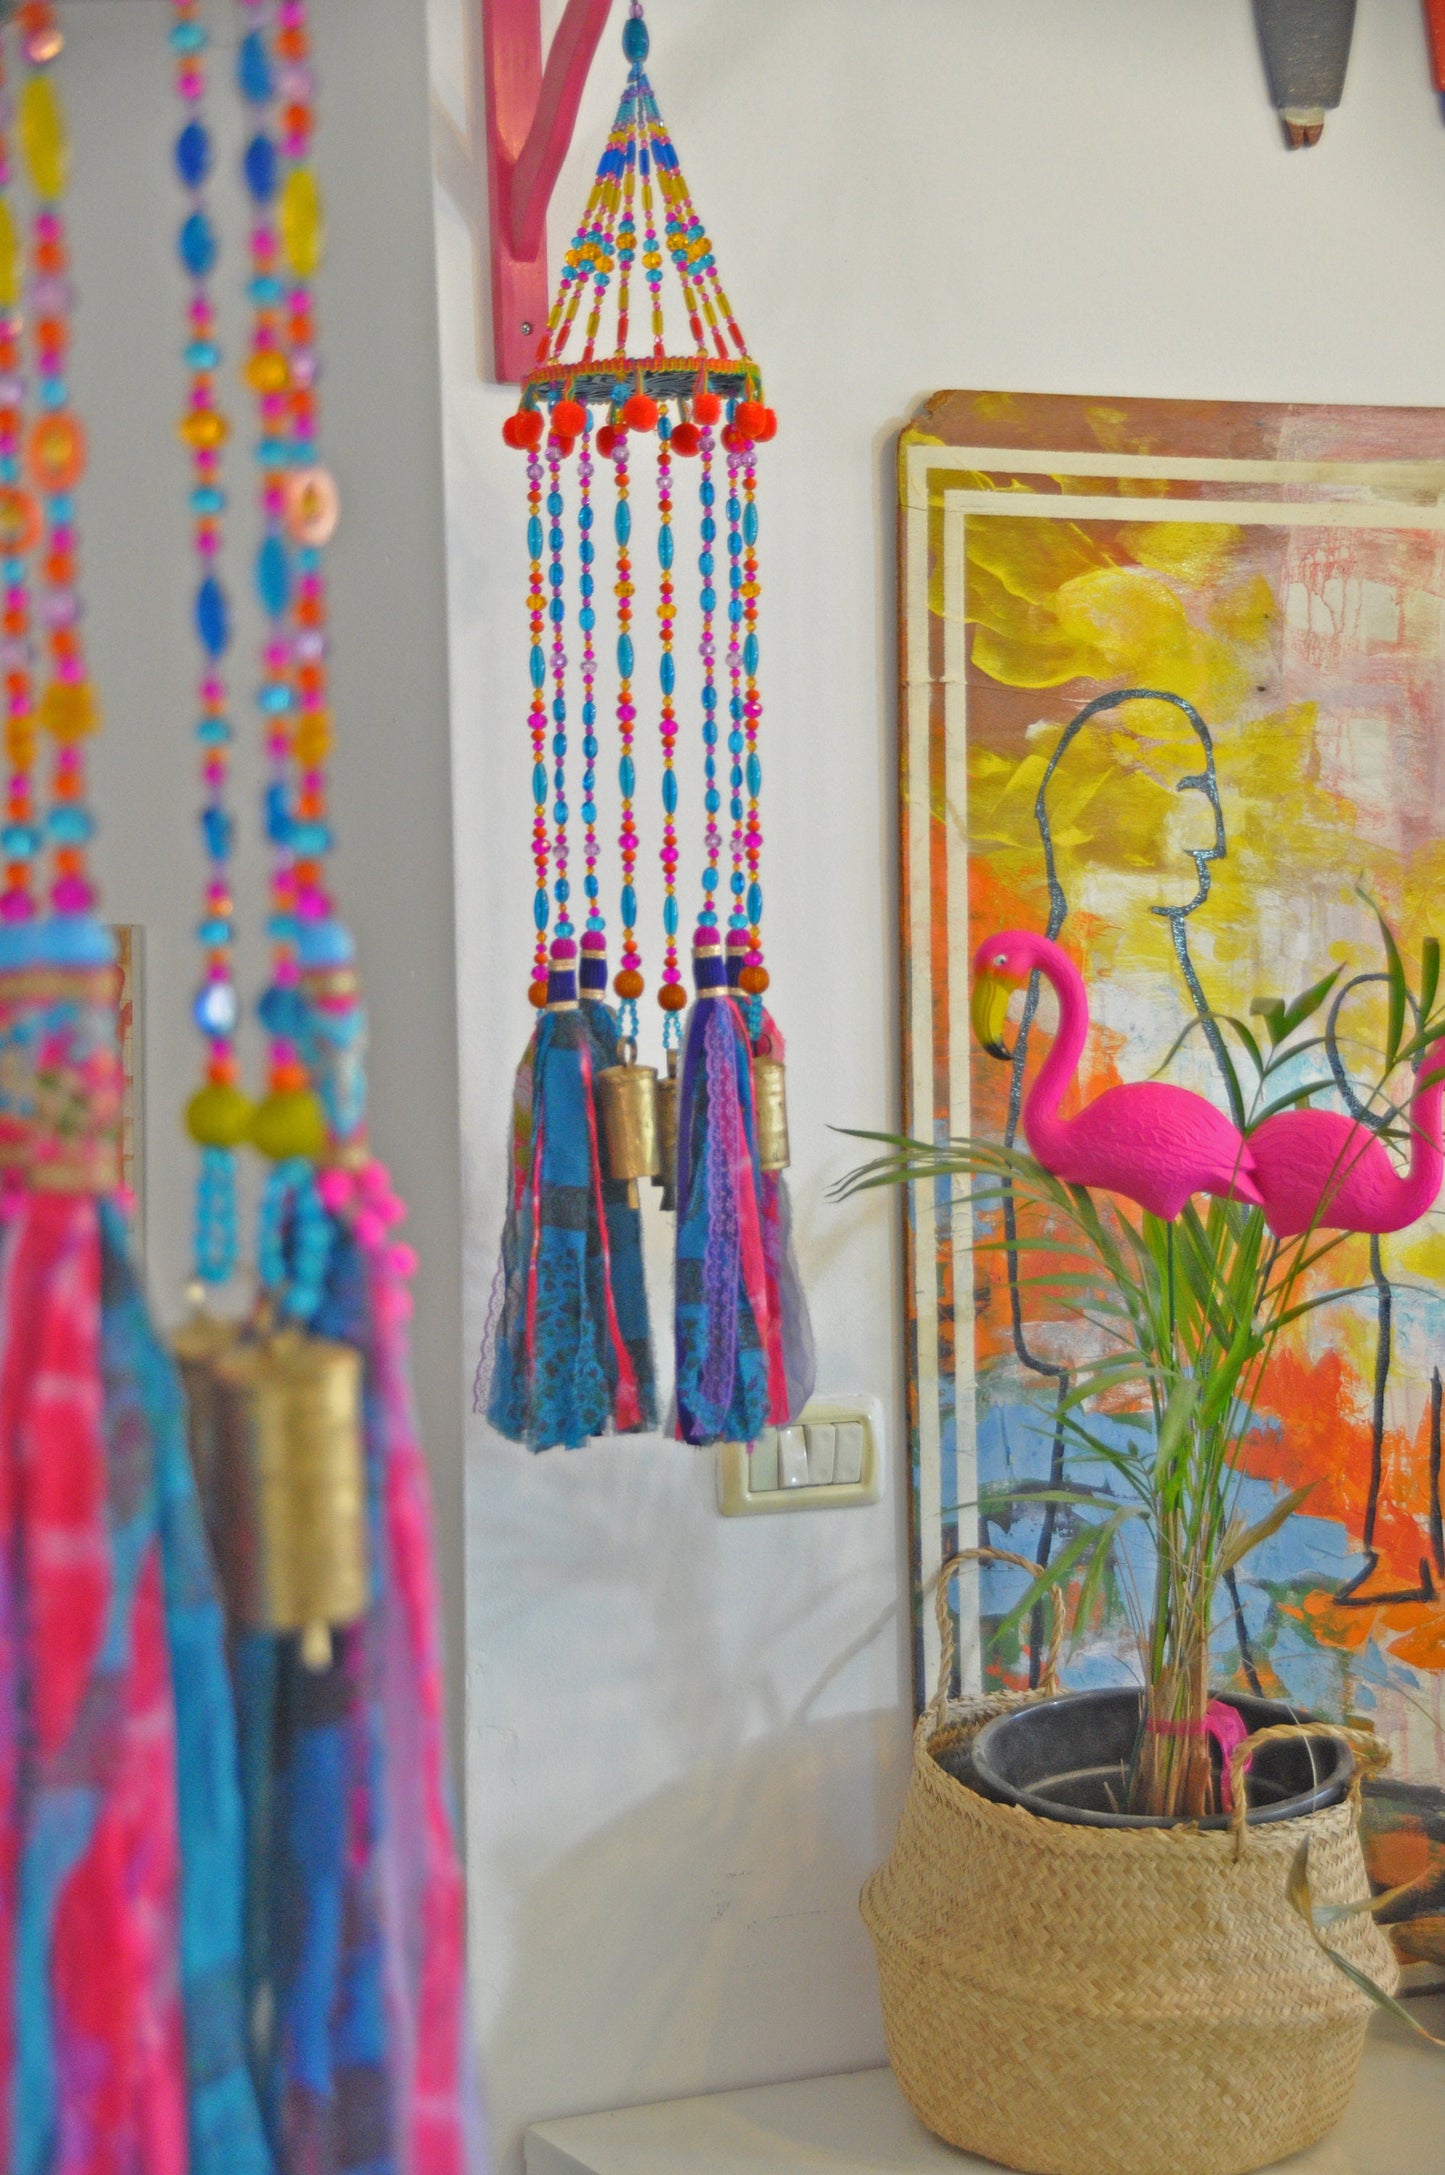 Fuchsia Turquoise purple and orange Beaded Wind Chime with fabric tassels, Unique bohemian hand Made To Order